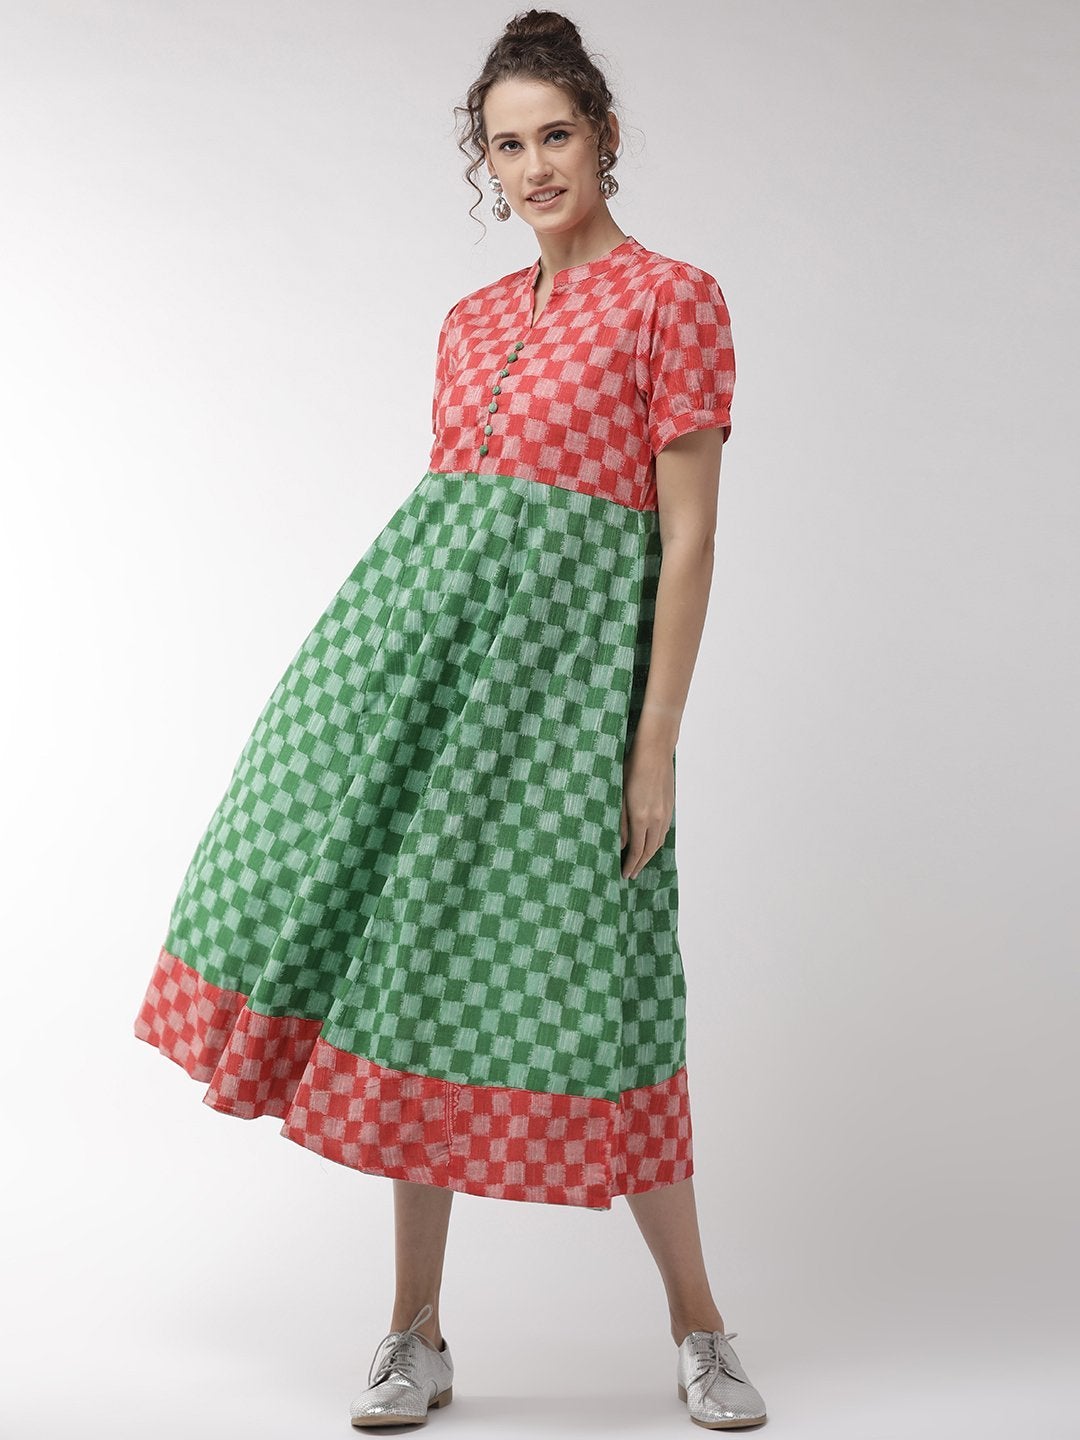 Women's Red And Green Dress - InWeave